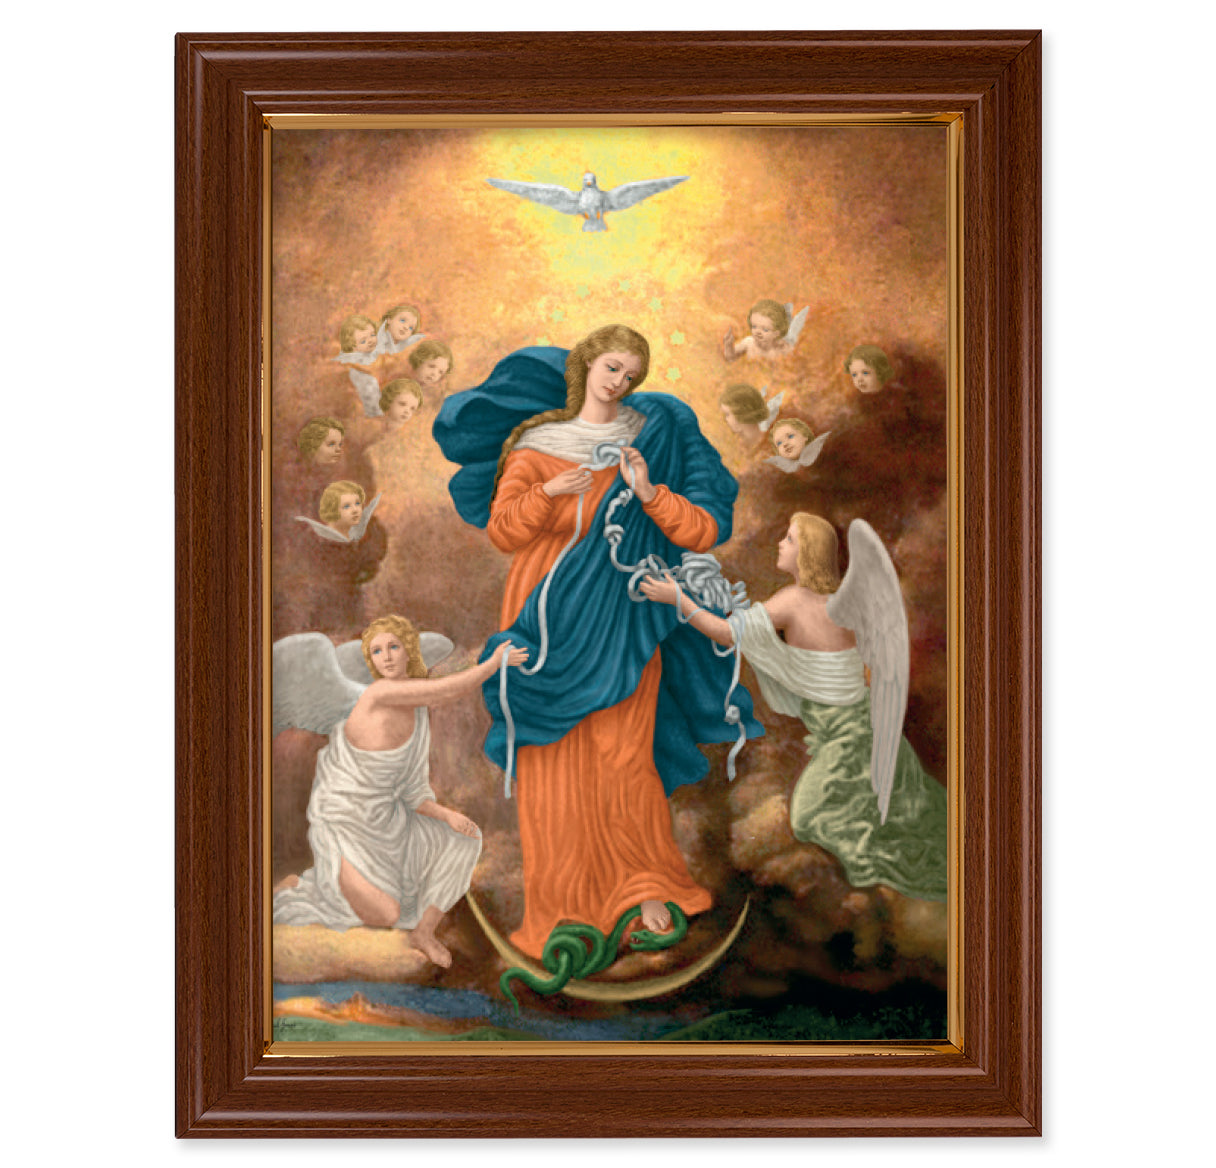 Our Lady Untier of Knots Picture Framed Wall Art Decor Large, Traditional Dark Walnut Finished Frame with Thin Gold Lip